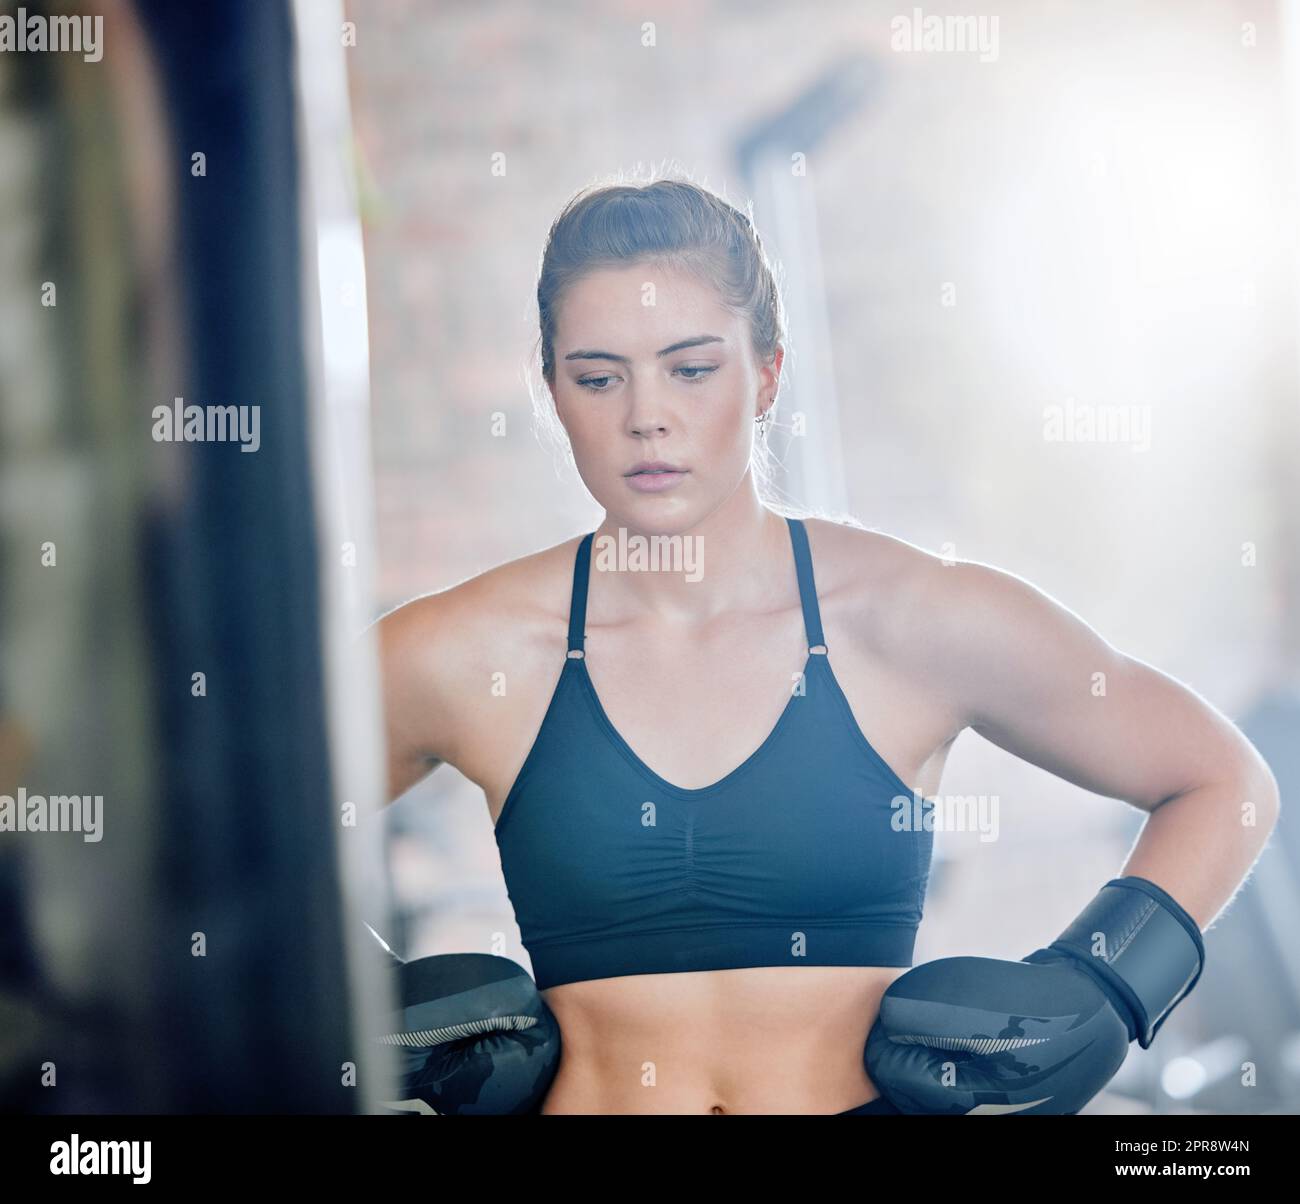 Healthy, fit and active female boxer thinking about a fight, competition or match in the gym or health club. Young woman training, exercising and working out in a fitness studio and looking dedicated Stock Photo